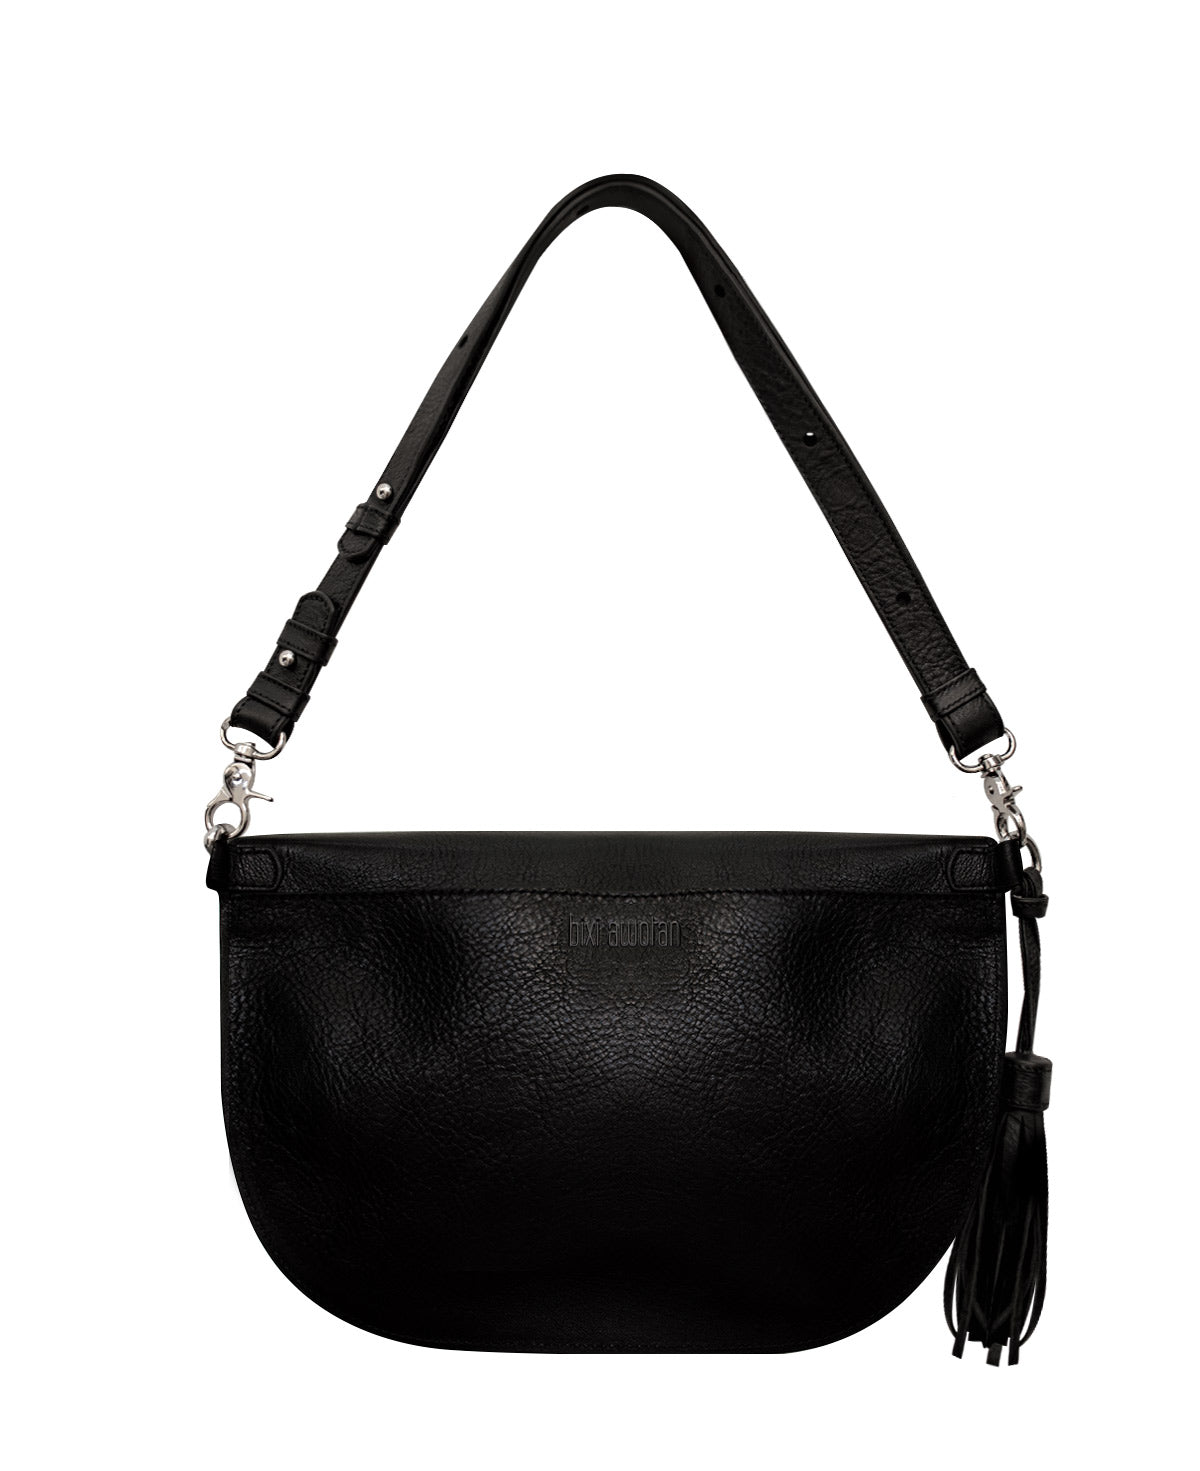 All Black Leather Fanny Pack for Women CHER Leather Sling Bag